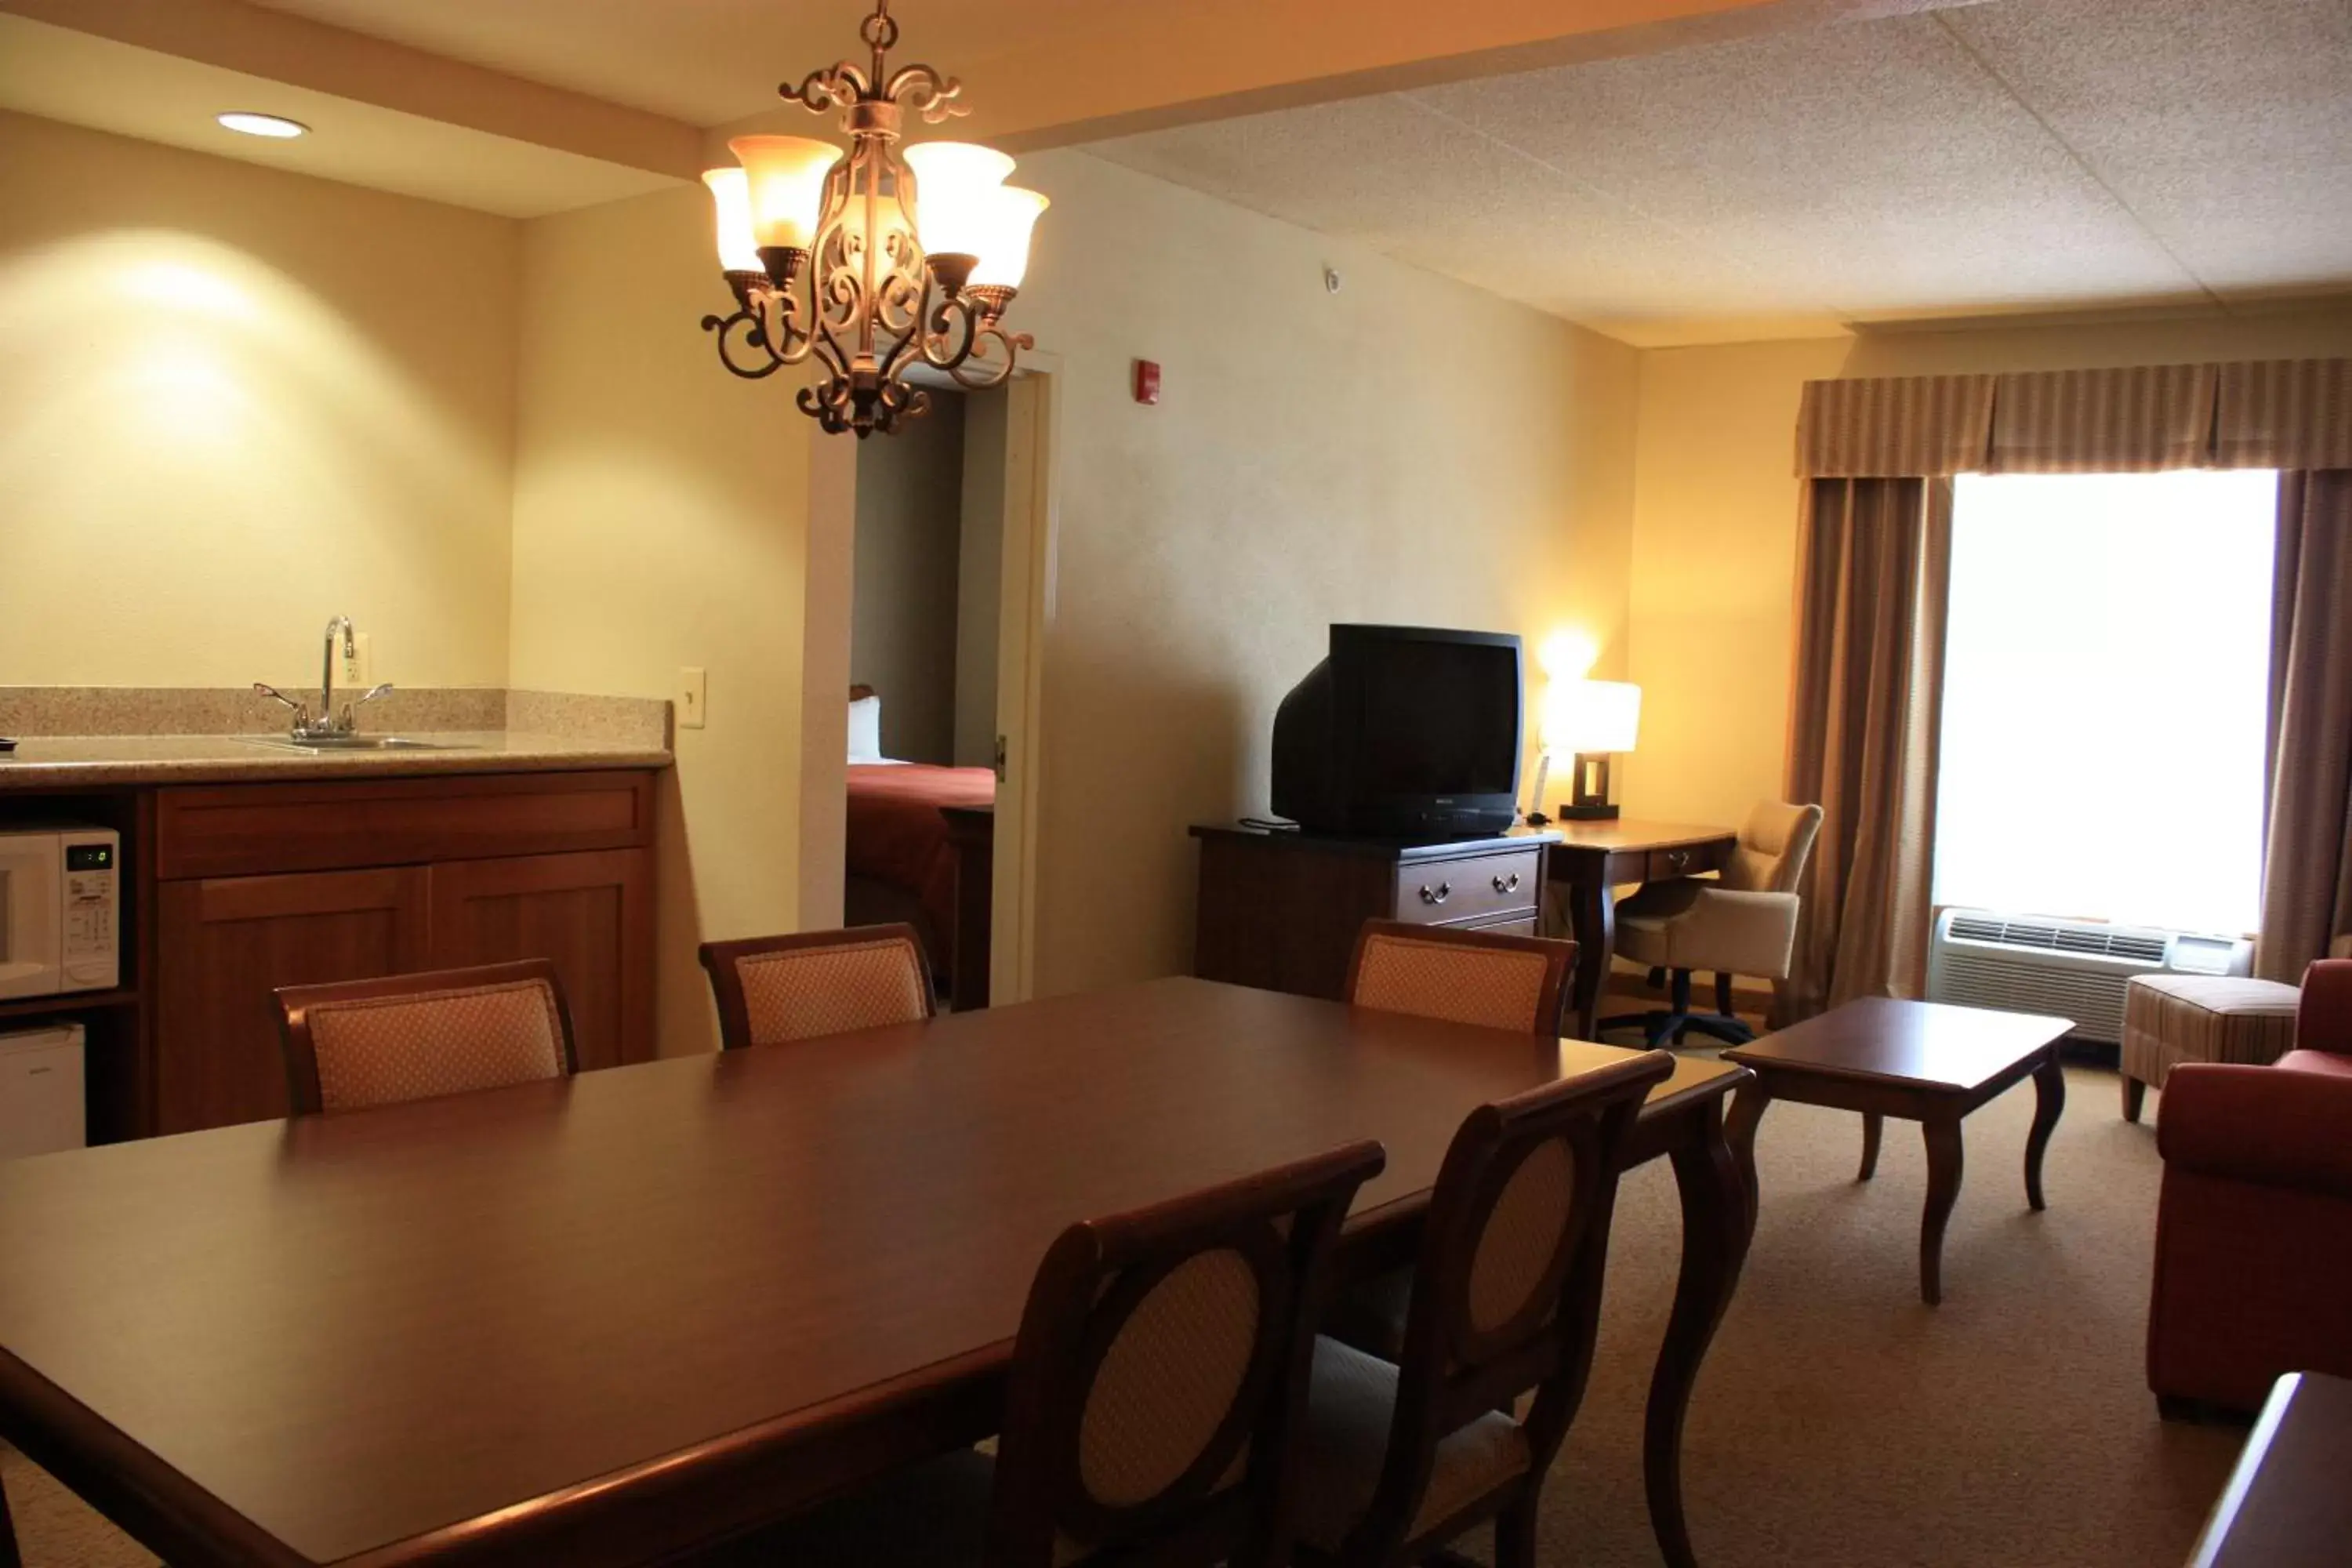 Living room in Country Inn & Suites by Radisson, BWI Airport (Baltimore), MD